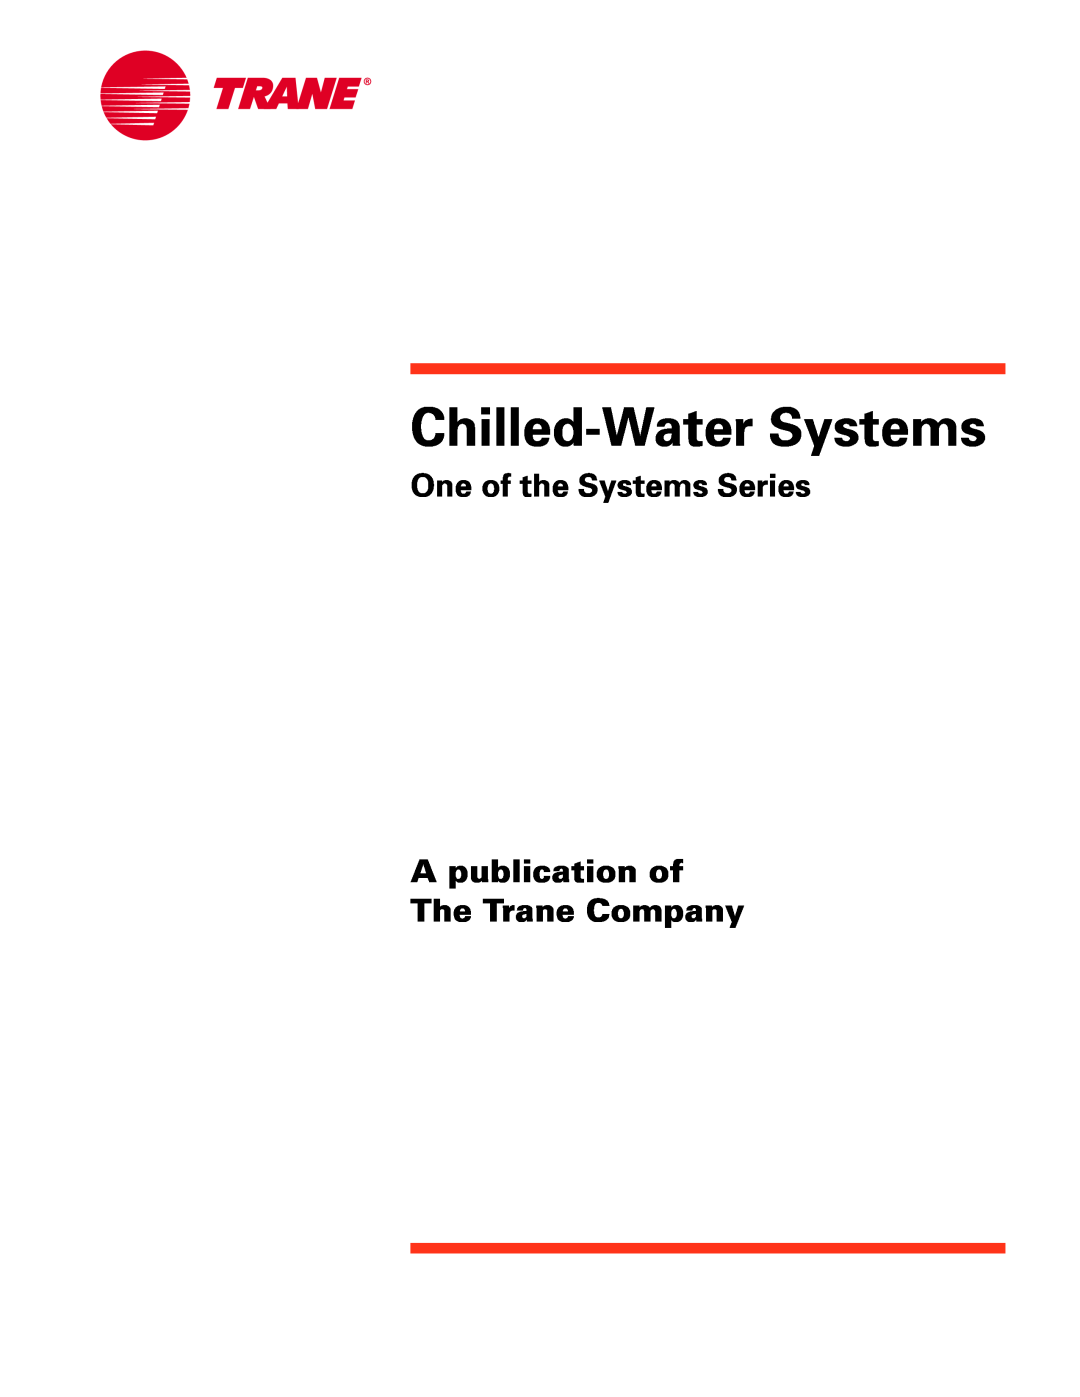 Trane TRG-TRC016-EN manual Chilled-WaterSystems, One of the Systems Series A publication of, The Trane Company 